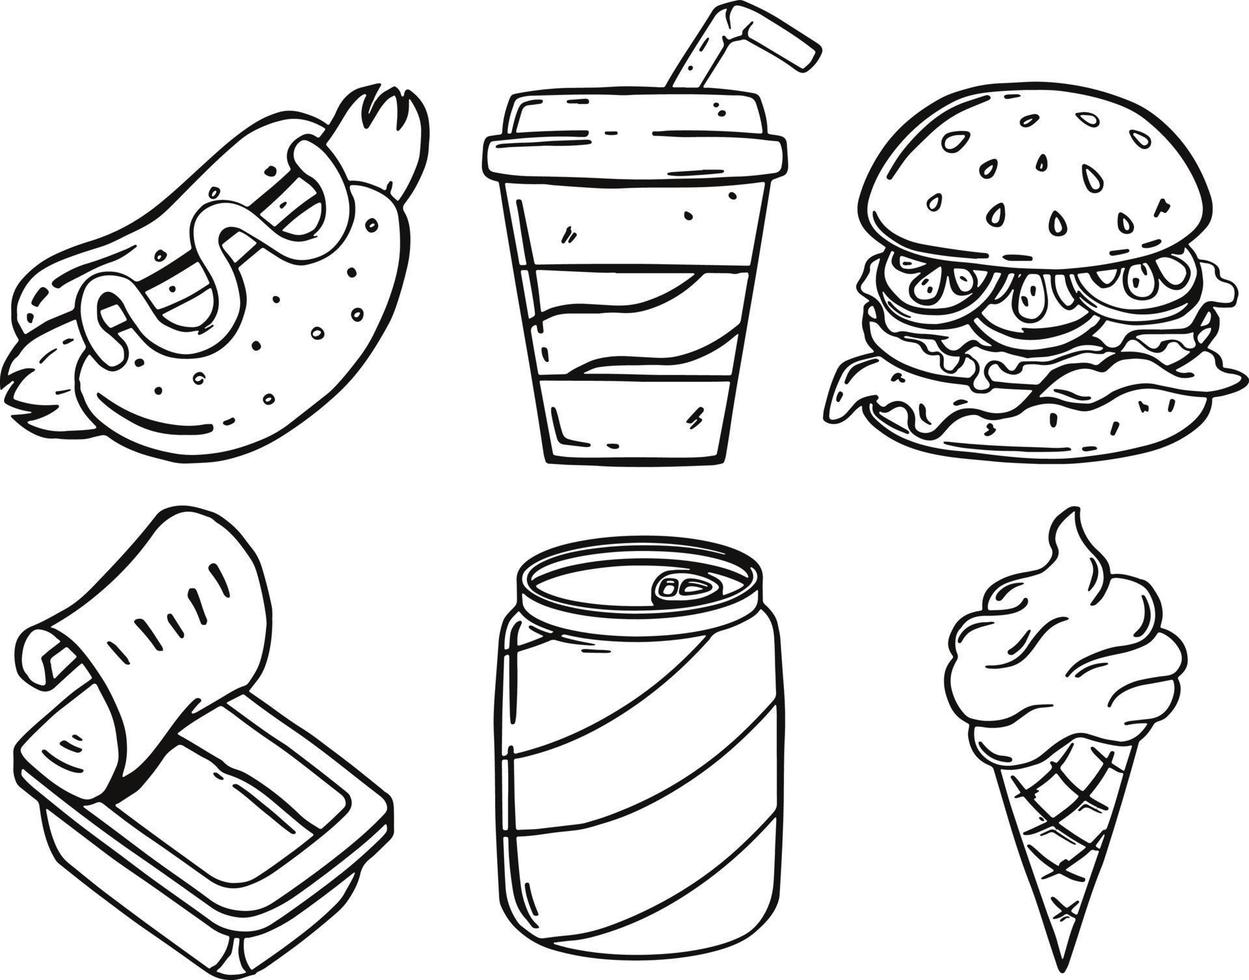 Set of Lunch Fast Food or Junk Food With Doodle or Sketchy Style on White Background. vector